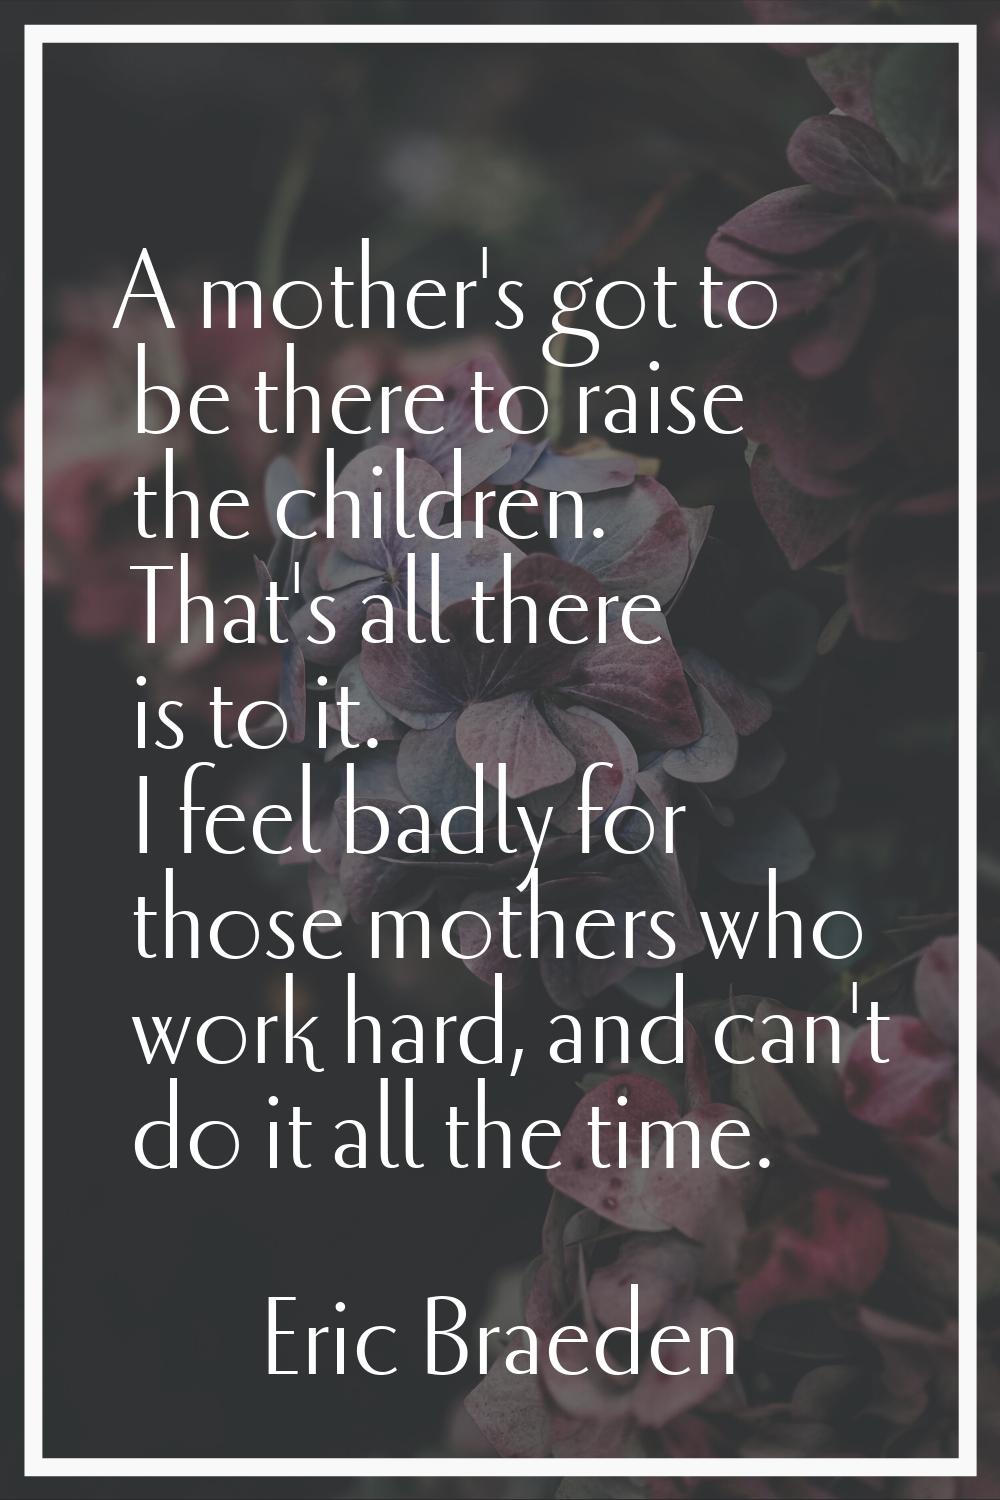 A mother's got to be there to raise the children. That's all there is to it. I feel badly for those